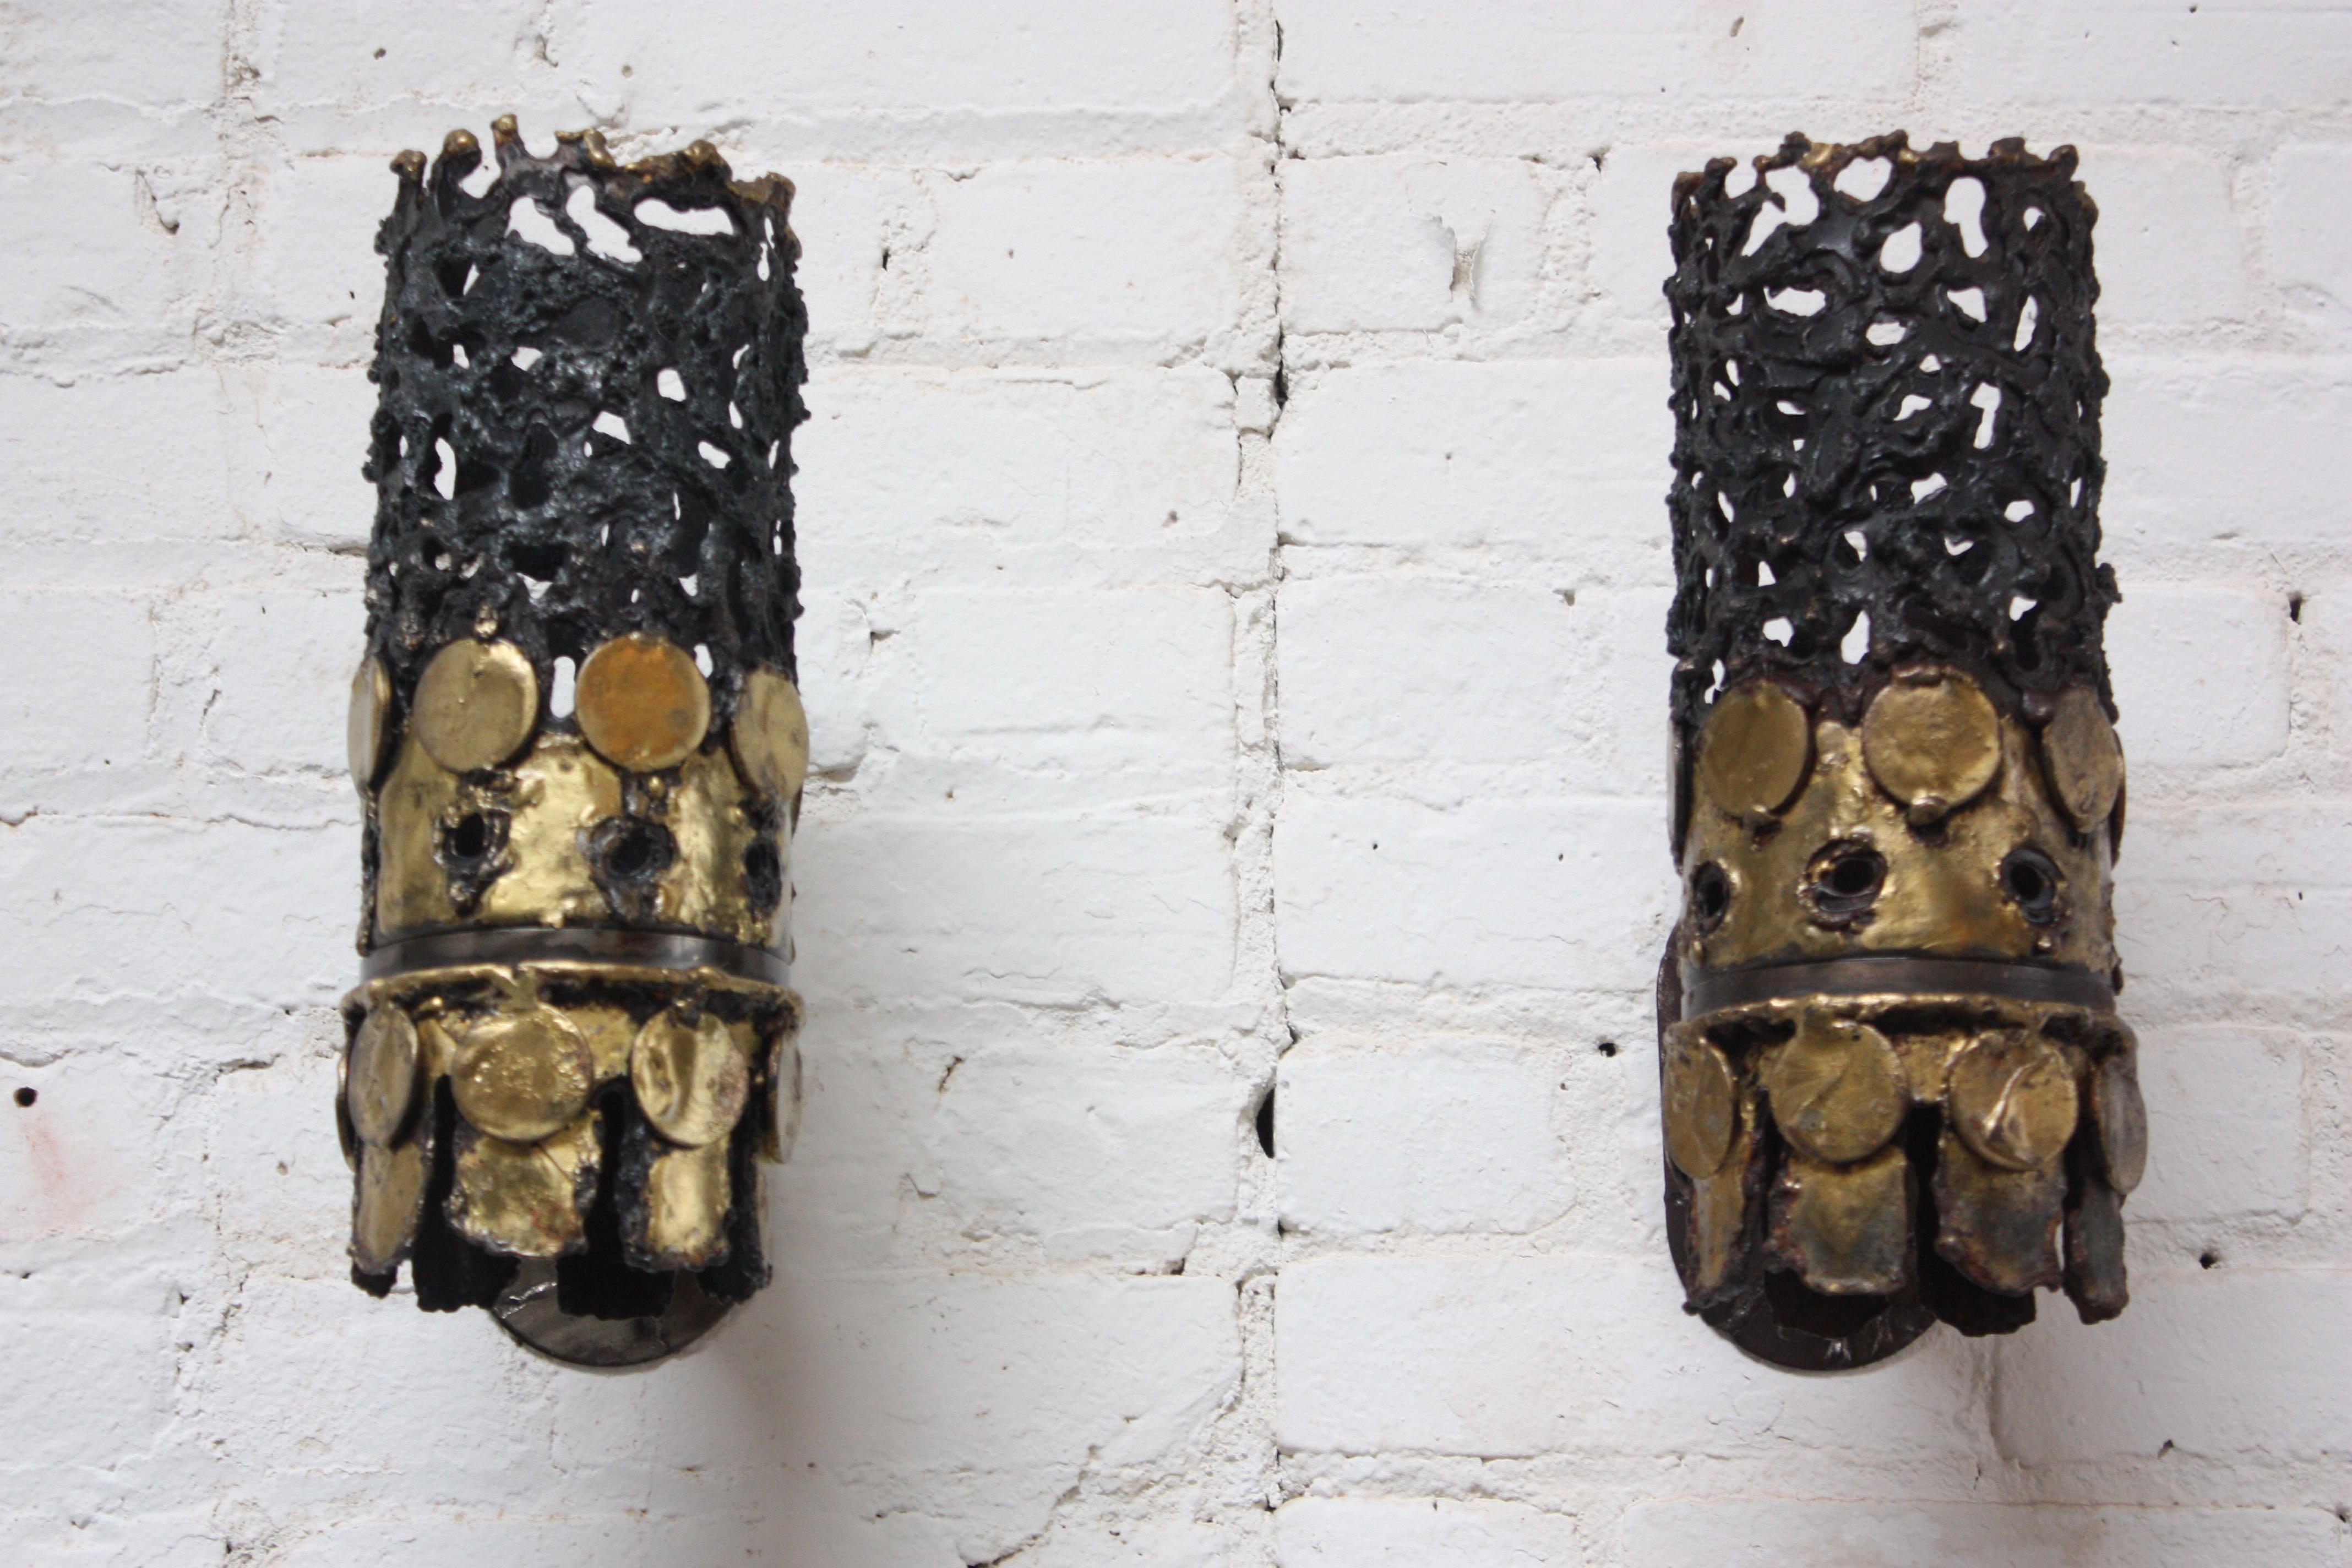 Mid-Century Modern (likely Scandinavian) cylindrical torch-cut steel and brass wall sconces in the Brutalist style. Designed with soldered, interlocking steel fittings which connect the sconces to a steel plate for wall-mounting to accommodate the